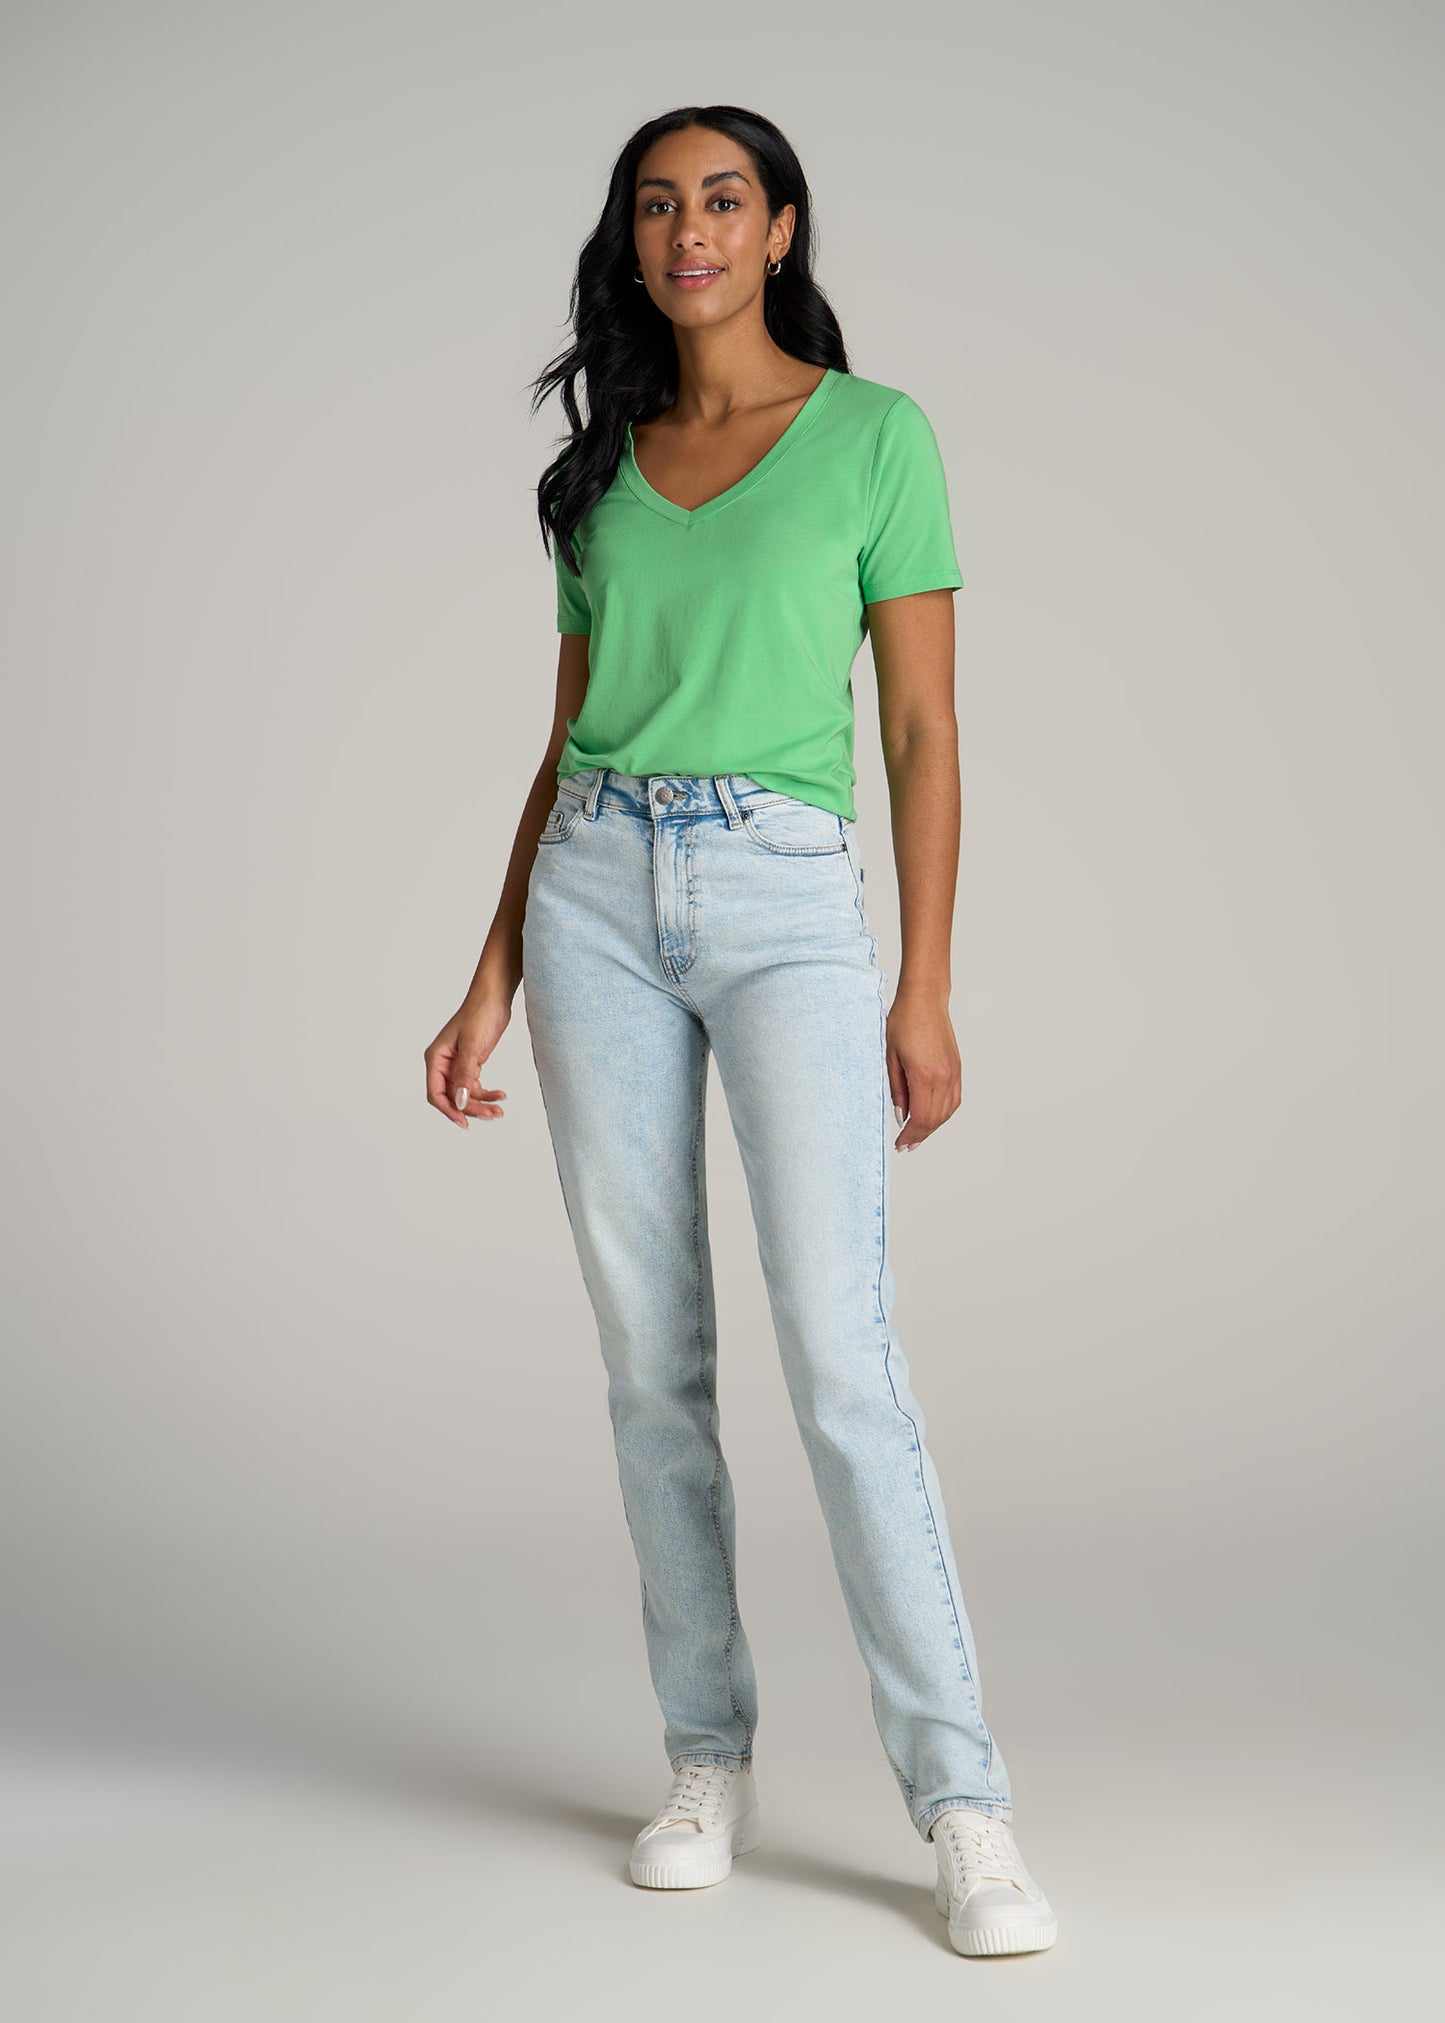 A tall woman wearing American Tall's Scoop V-Neck Tee in Matcha and Emma High Rise Relaxed Jeans in Vintage Light Indigo.